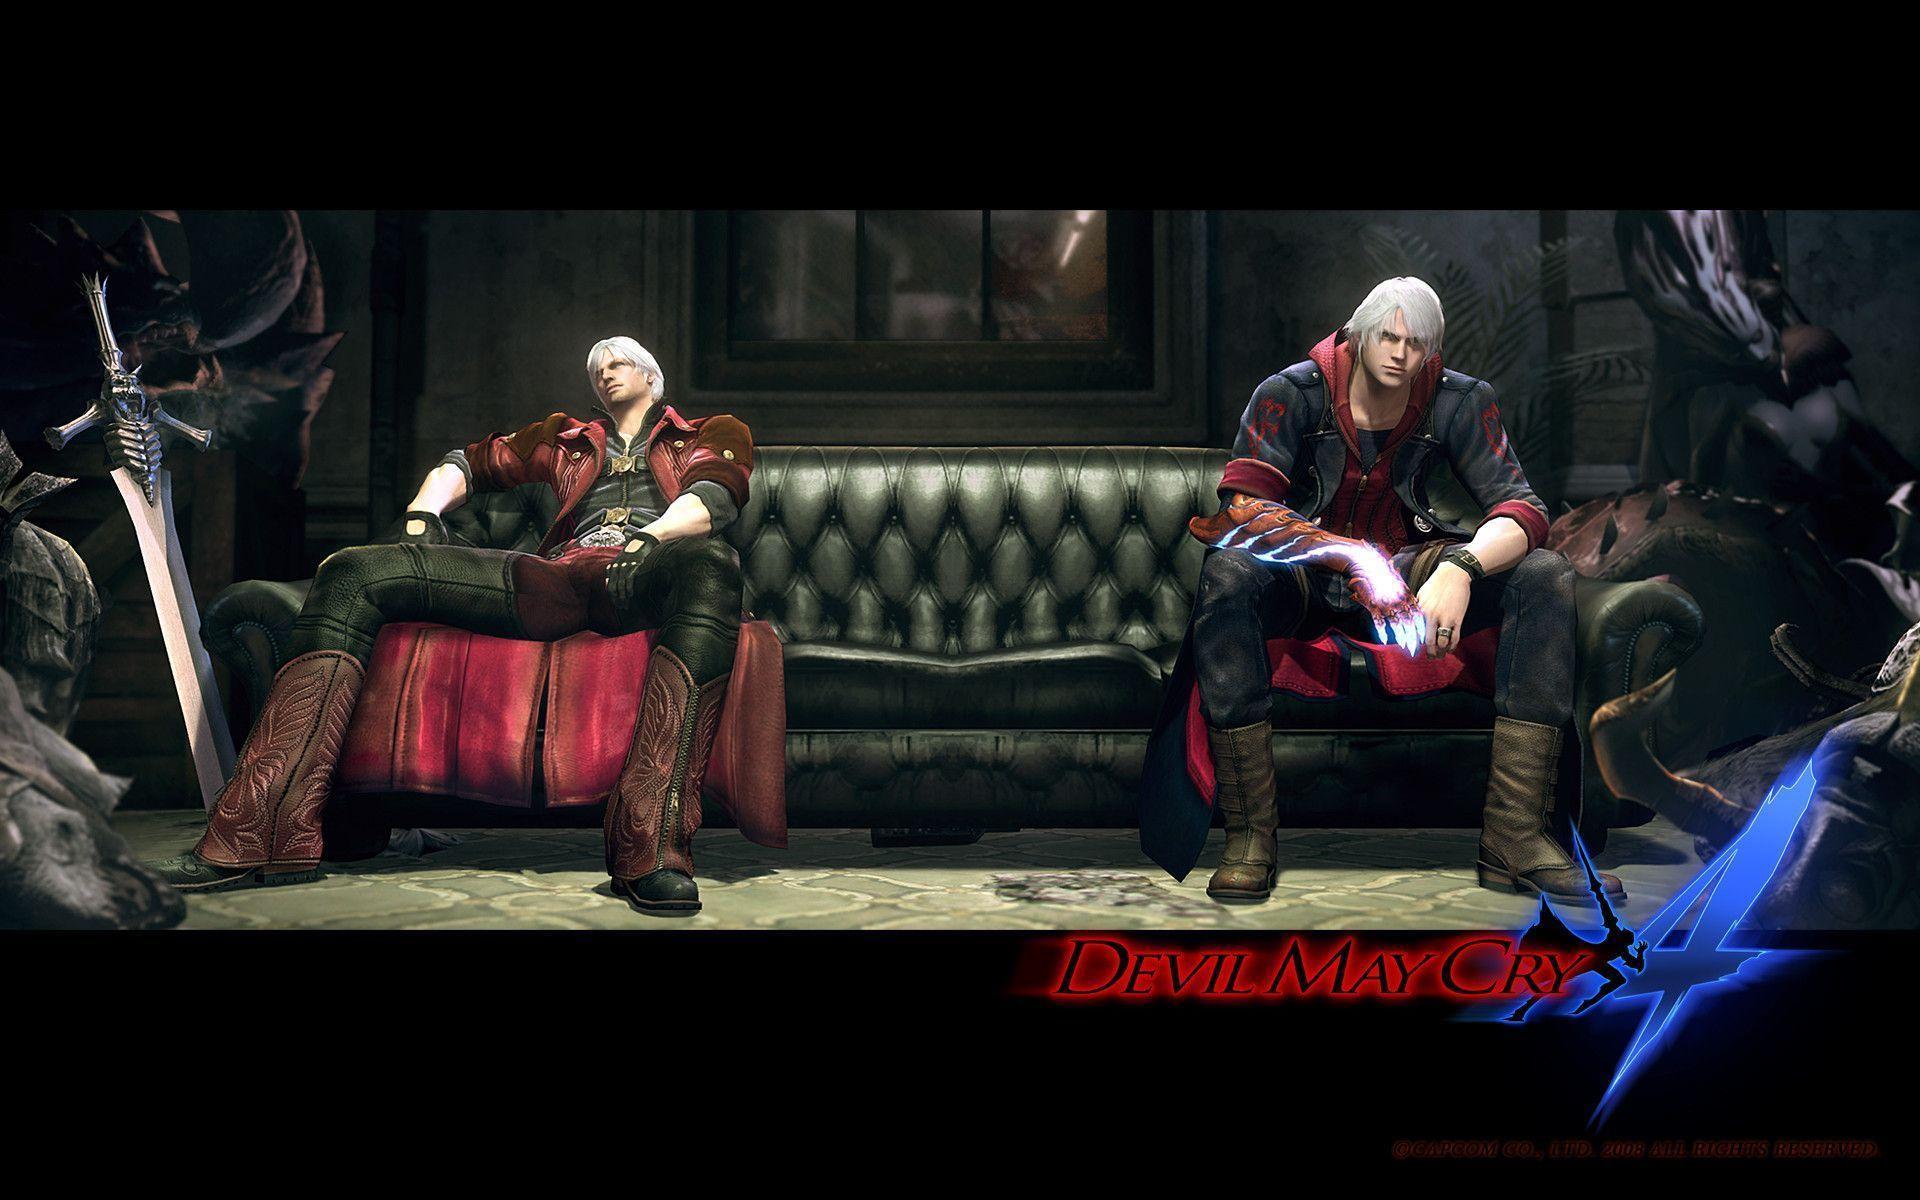 image For > Devil May Cry Wallpaper HD